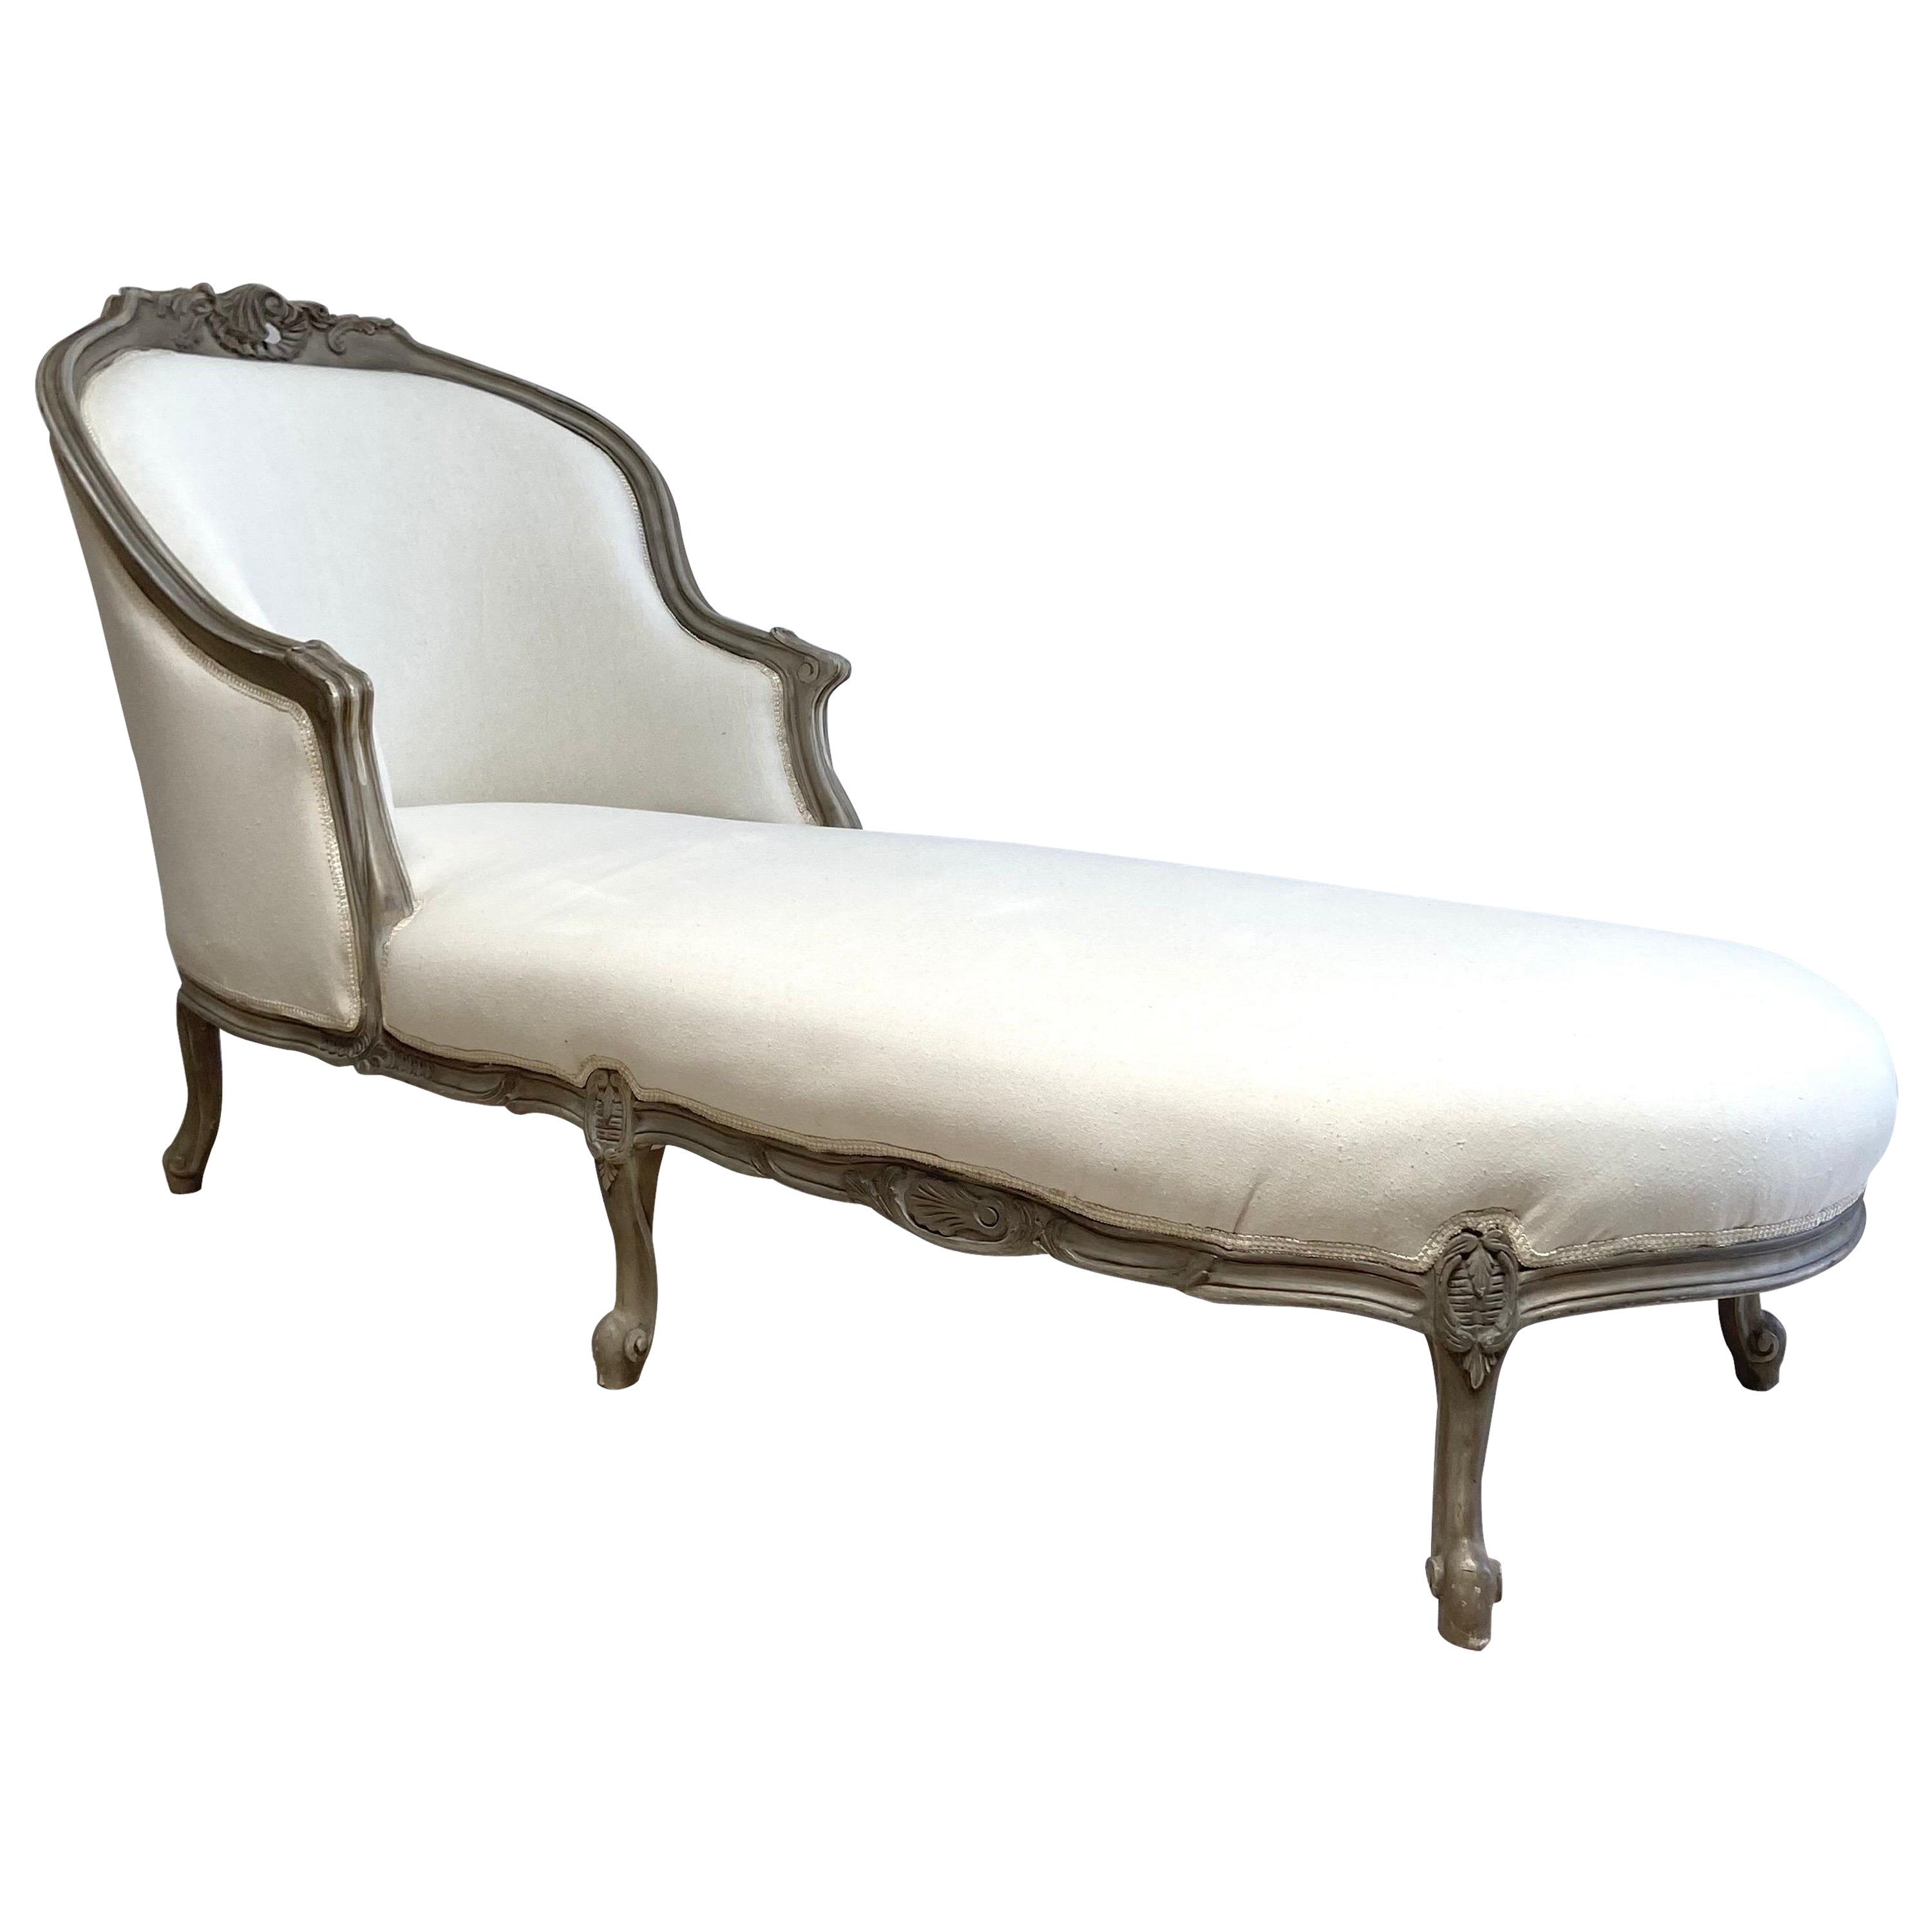 Vintage French Upholstered Chaise Lounge in Gray Finish For Sale at 1stDibs